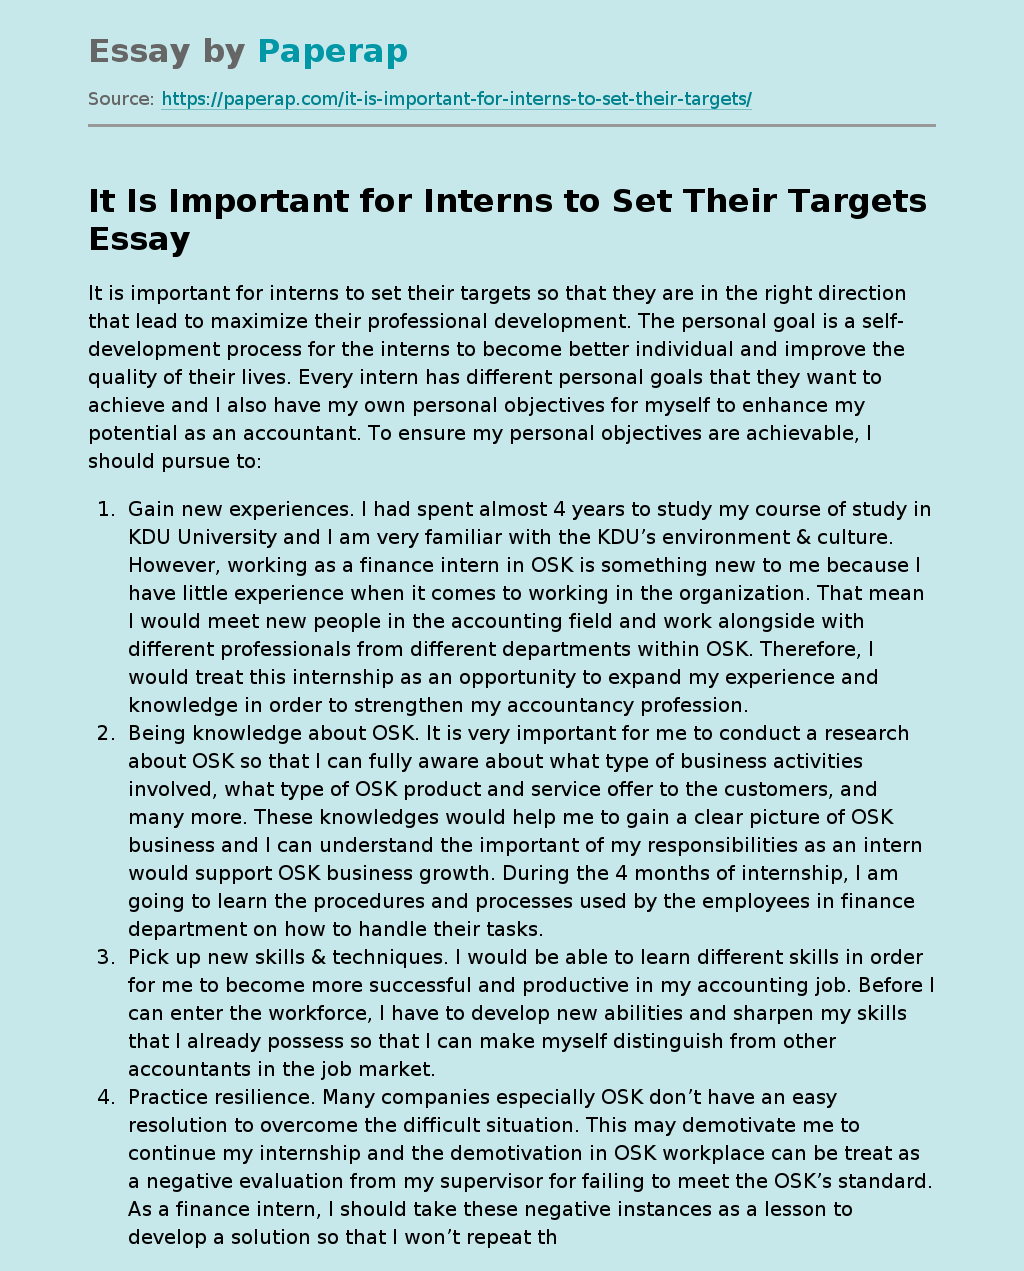 It Is Important for Interns to Set Their Targets